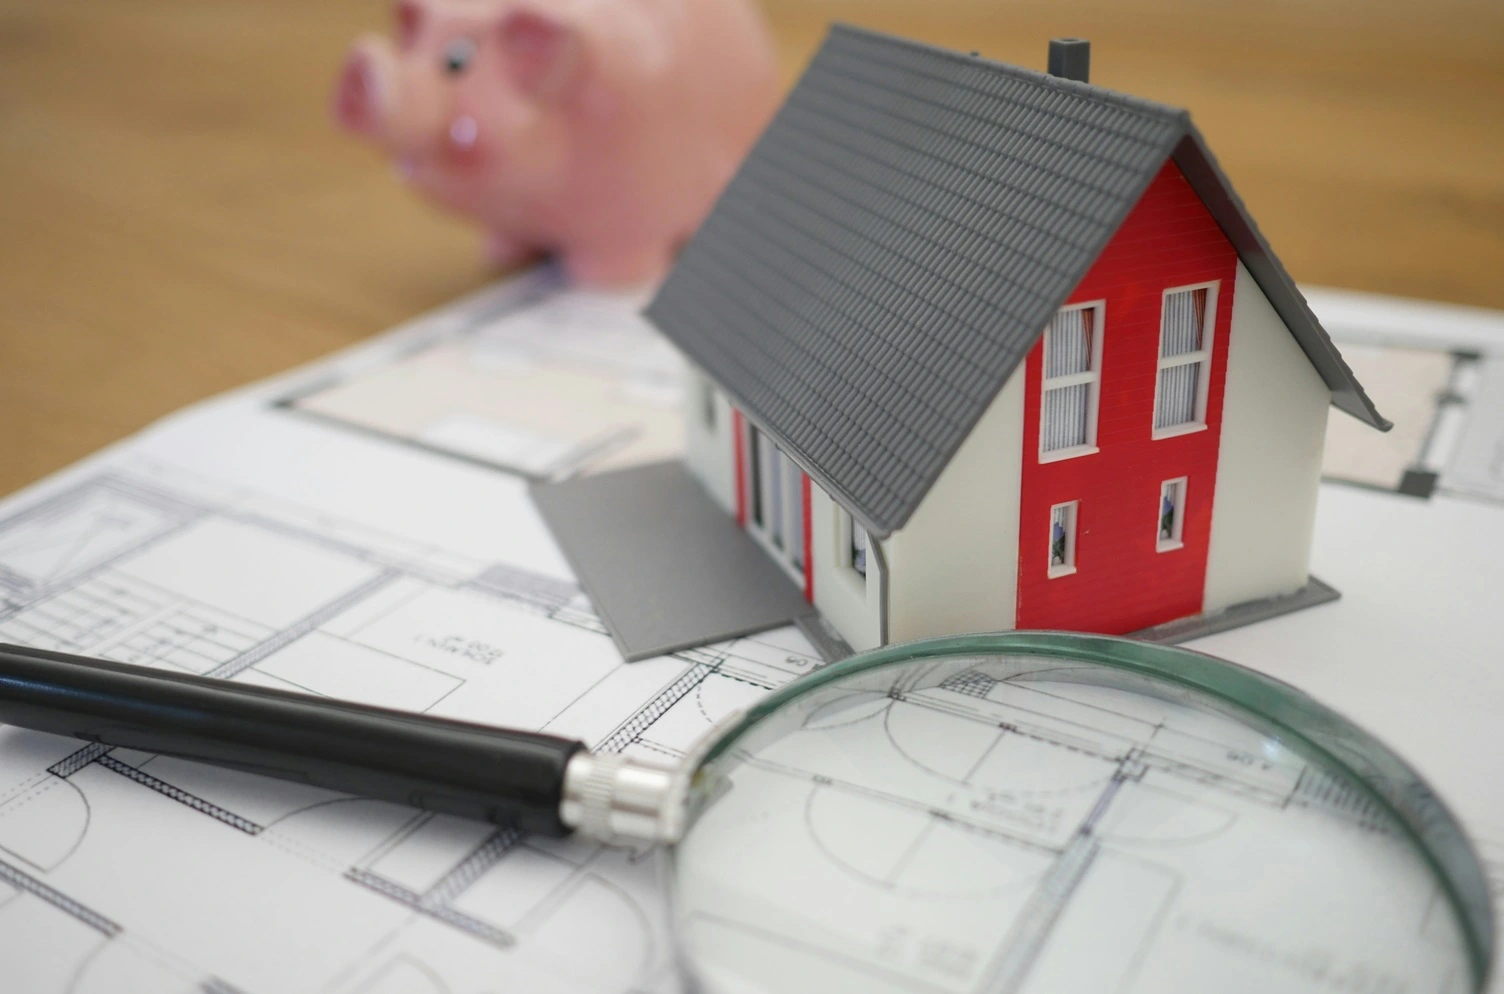 How To Get A Property Investment Loan?